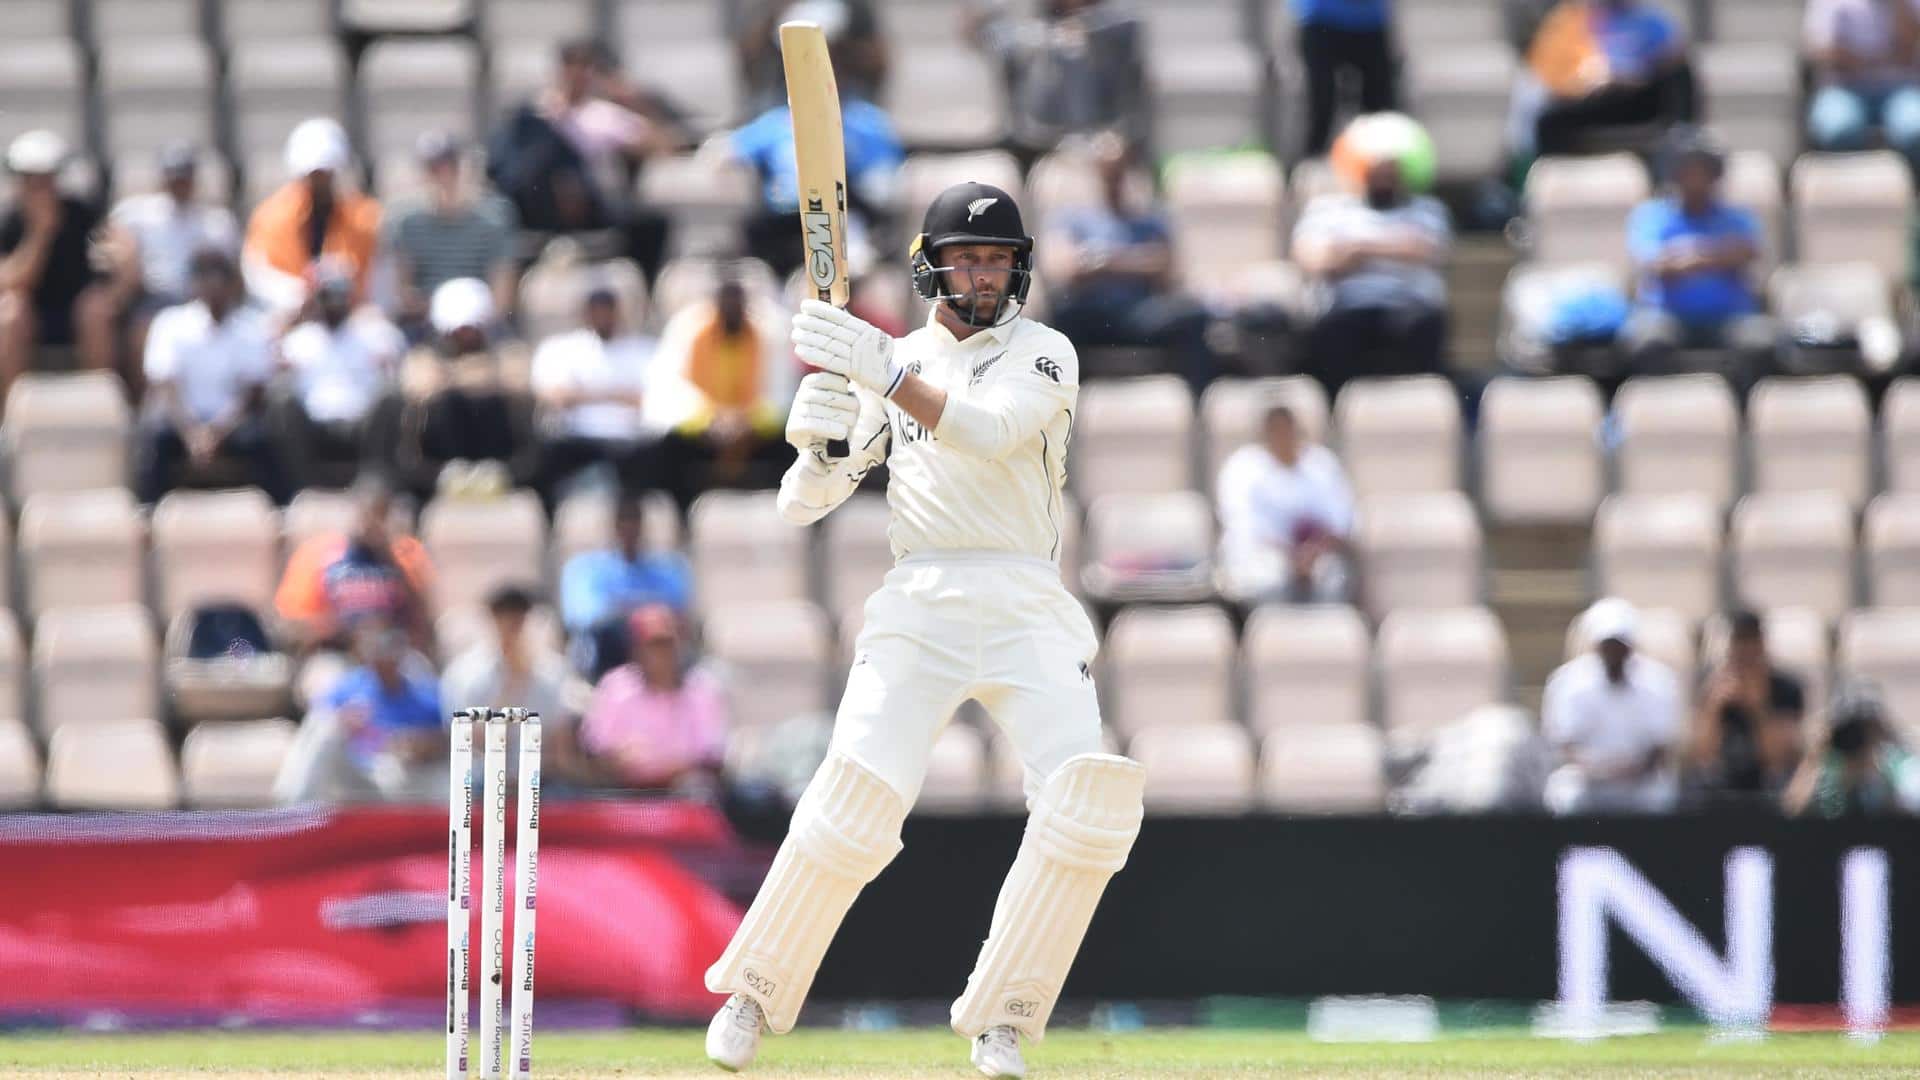 NZ vs ENG: Devon Conway hammers his 7th Test fifty